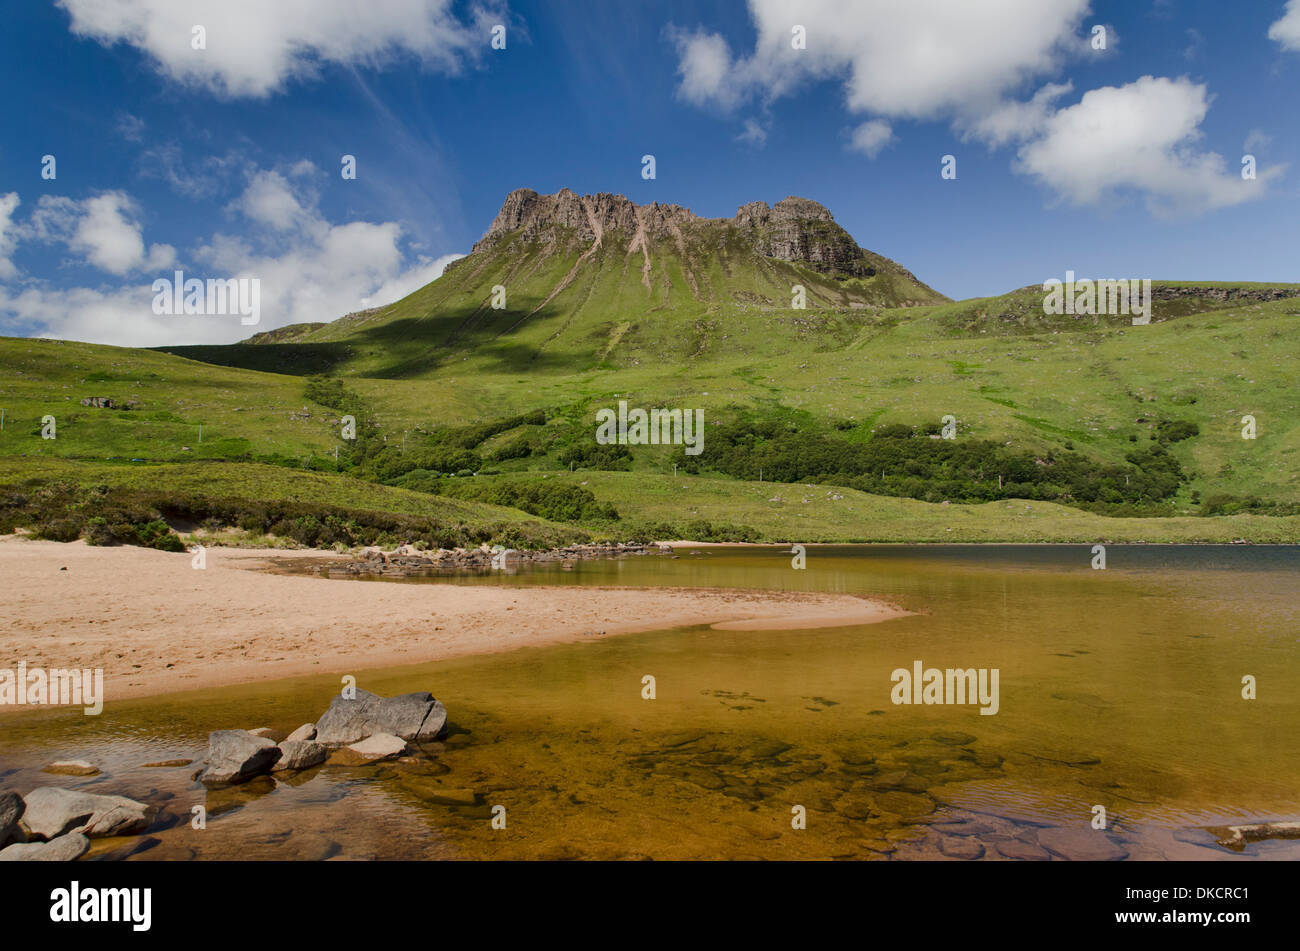 The mountain Stac Pollaidh in Sutherland, in the Scottish Highlands Stock Photo